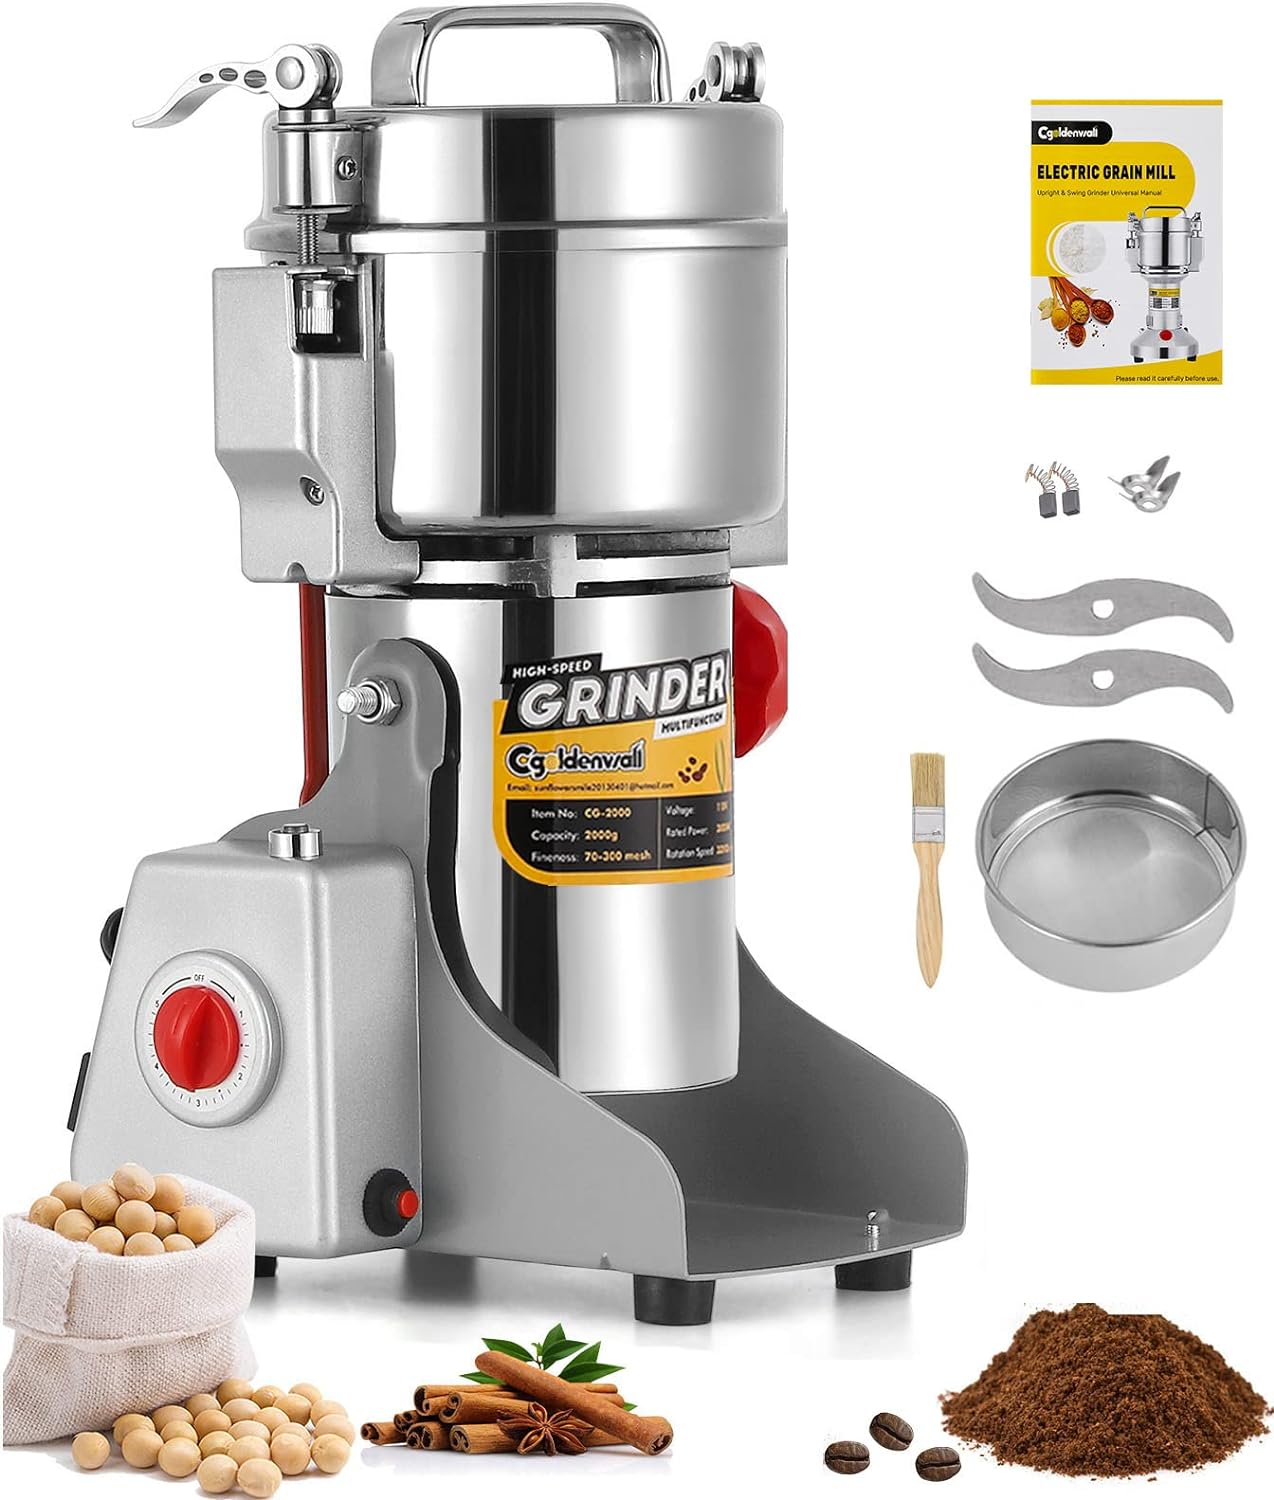 CGOLDENWALL 700g Electric Grain Grinder Mill Safety Upgraded 2400W High-speed Spice Herb Grinder Commercial Superfine Grinding Machine Dry Cereals Pulverizer CE 110V (700g Swing Type)